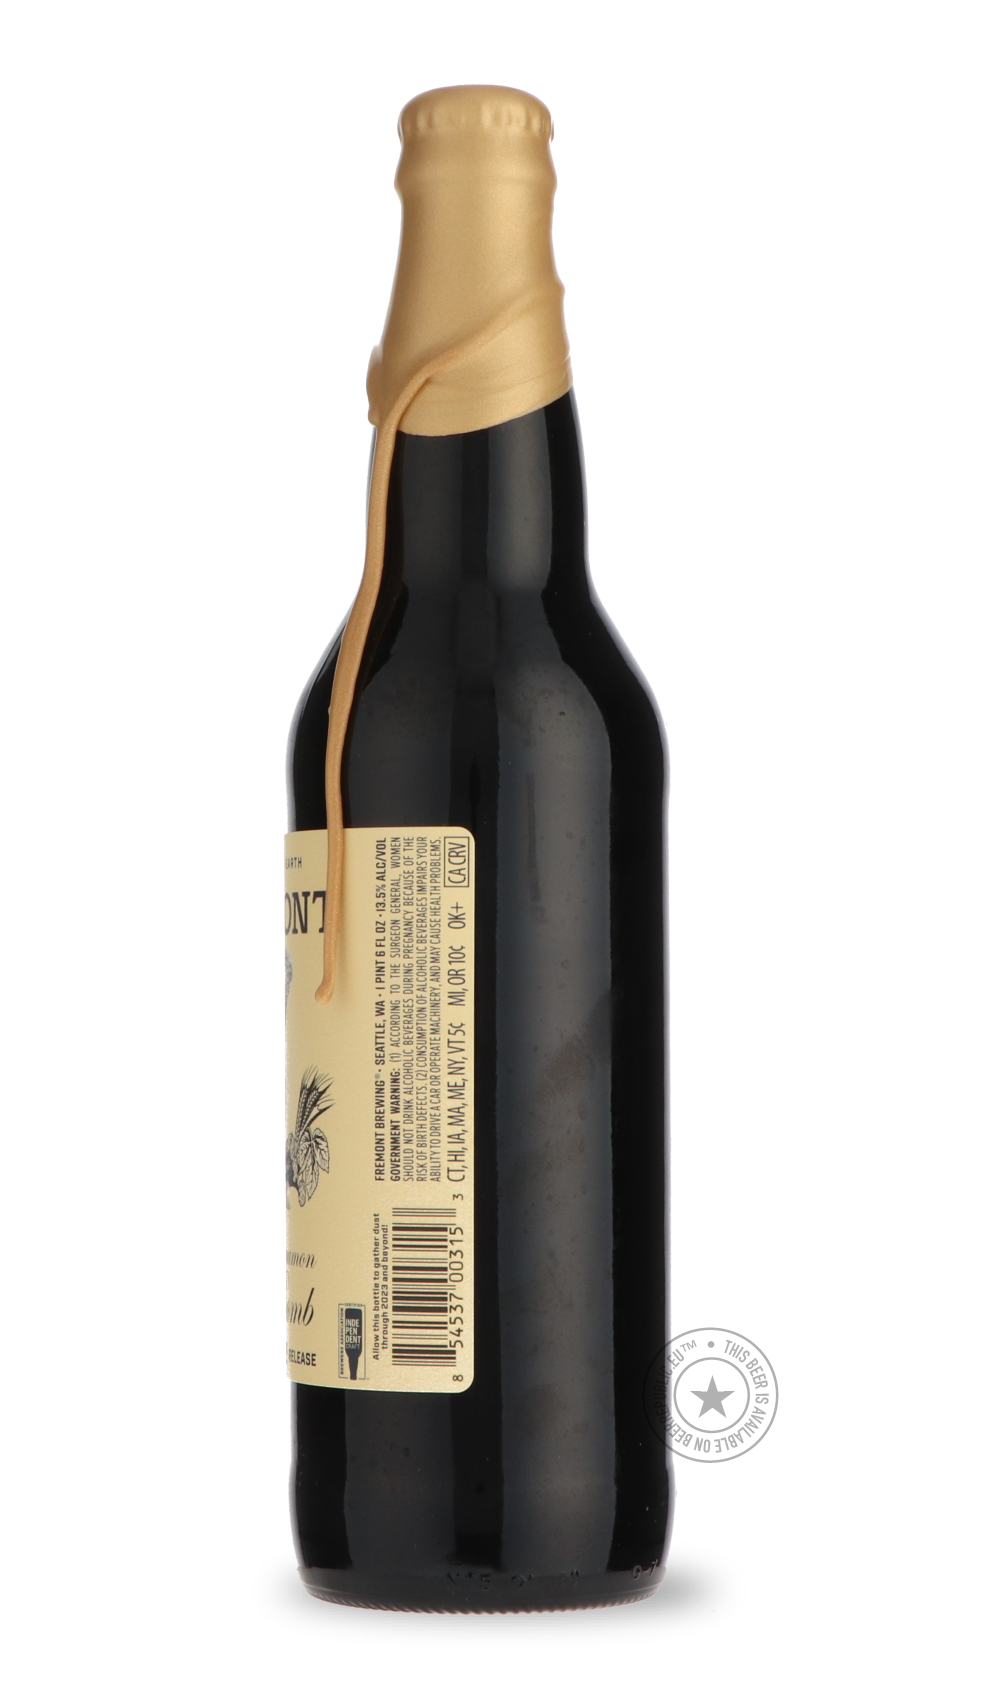 -Fremont- Coffee Cinnamon B-Bomb 2022-Brown & Dark- Only @ Beer Republic - The best online beer store for American & Canadian craft beer - Buy beer online from the USA and Canada - Bier online kopen - Amerikaans bier kopen - Craft beer store - Craft beer kopen - Amerikanisch bier kaufen - Bier online kaufen - Acheter biere online - IPA - Stout - Porter - New England IPA - Hazy IPA - Imperial Stout - Barrel Aged - Barrel Aged Imperial Stout - Brown - Dark beer - Blond - Blonde - Pilsner - Lager - Wheat - Wei